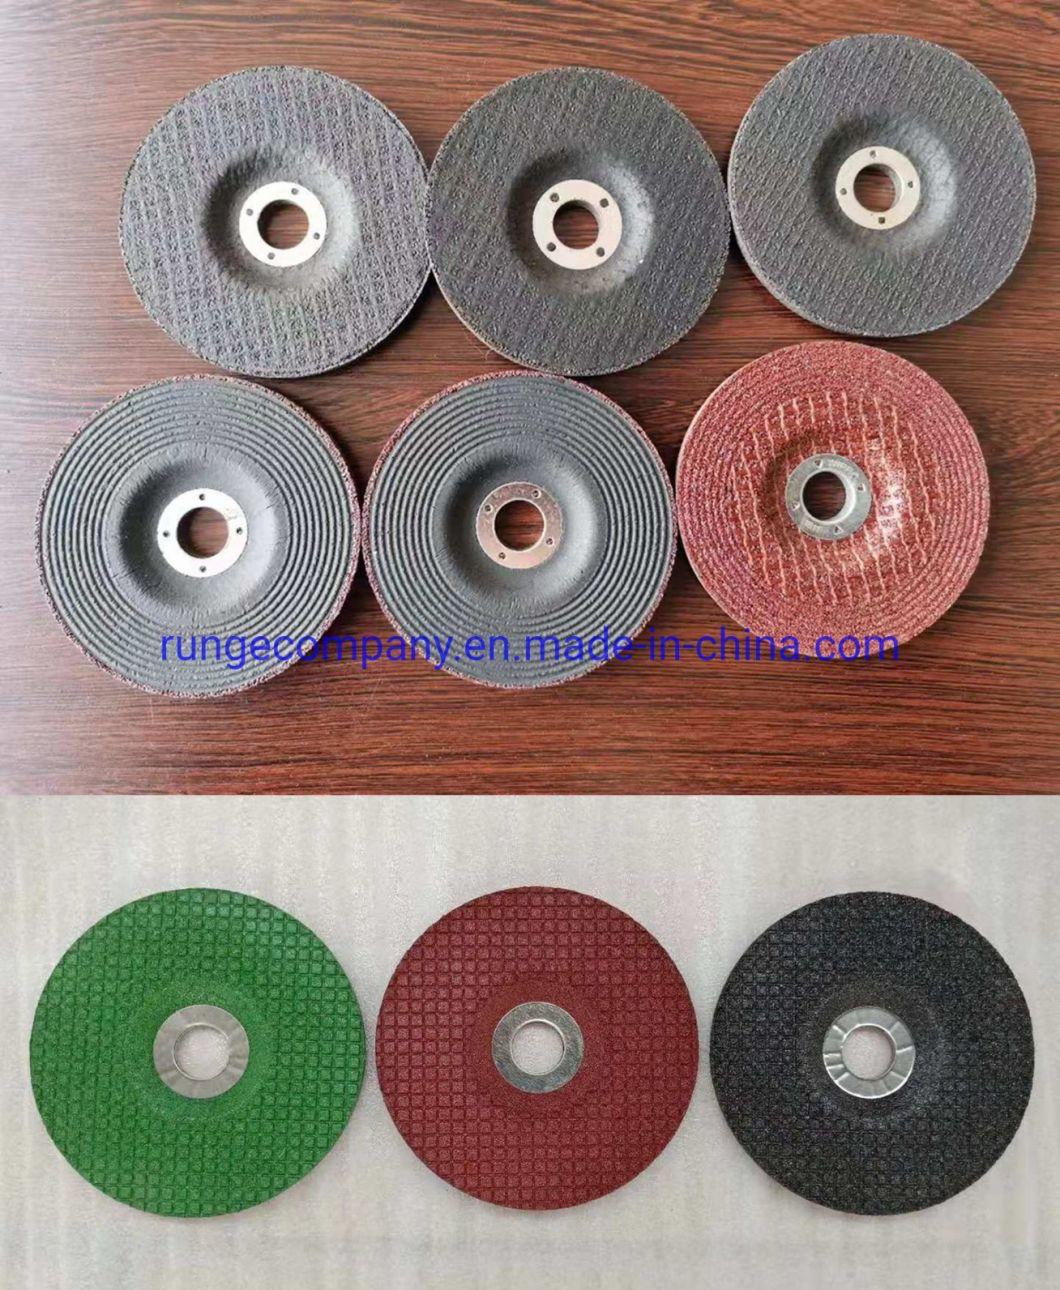 Electric Power Tools 7 Inch Type 27 Pipe Cutting and Light Grinding Wheel for Metals, Stainless Steel